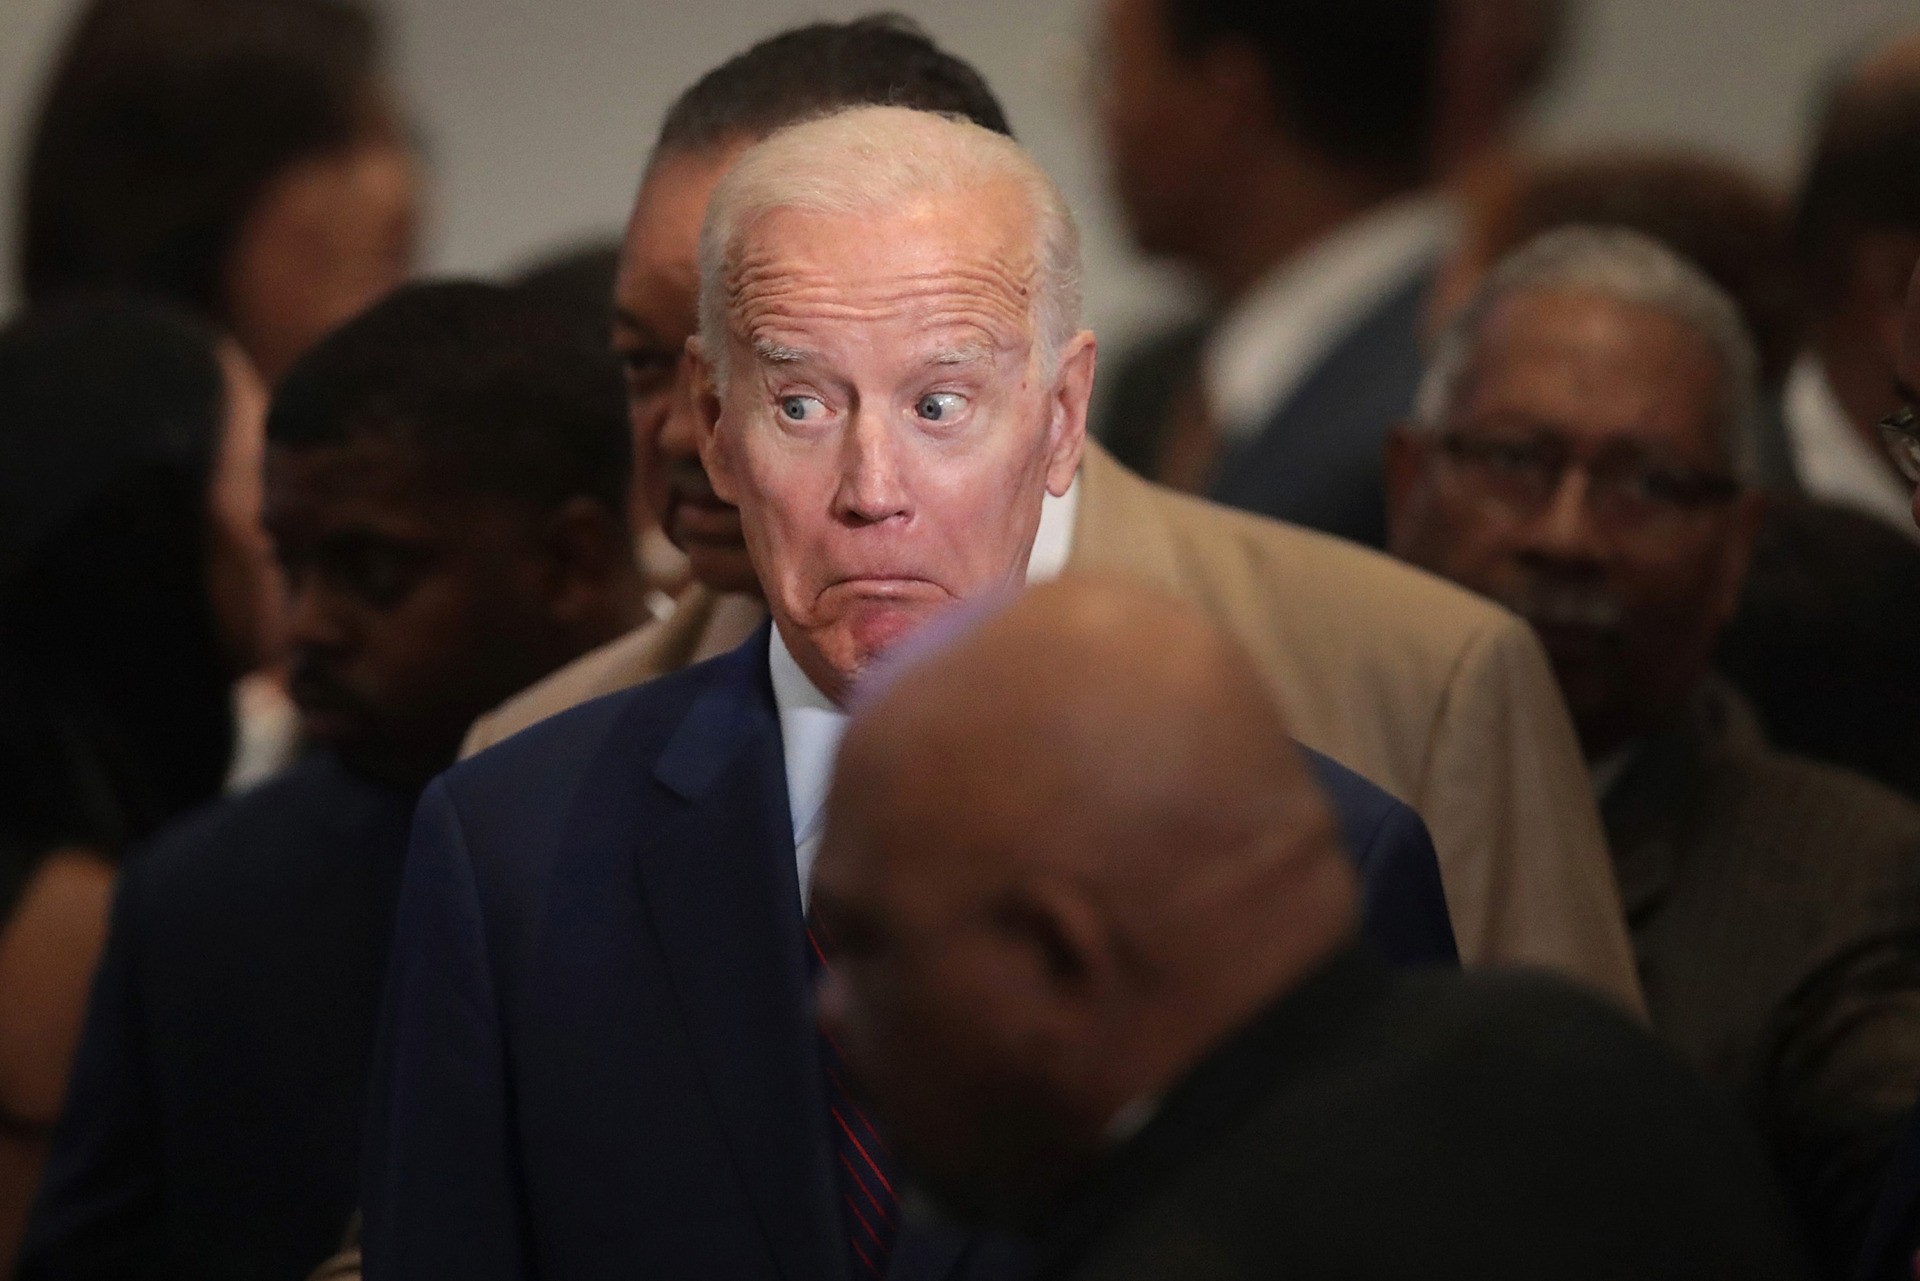 CHICAGO, ILLINOIS - JUNE 28: Democratic presidential candidate, former Vice President Joe Biden attends the Rainbow PUSH Coalition Annual International Convention on June 28, 2019 in Chicago, Illinois. Biden is one of 25 candidates seeking the Democratic nomination for president and the opportunity to face President Donald Trump in the 2020 general election. (Photo by Scott Olson/Getty Images)